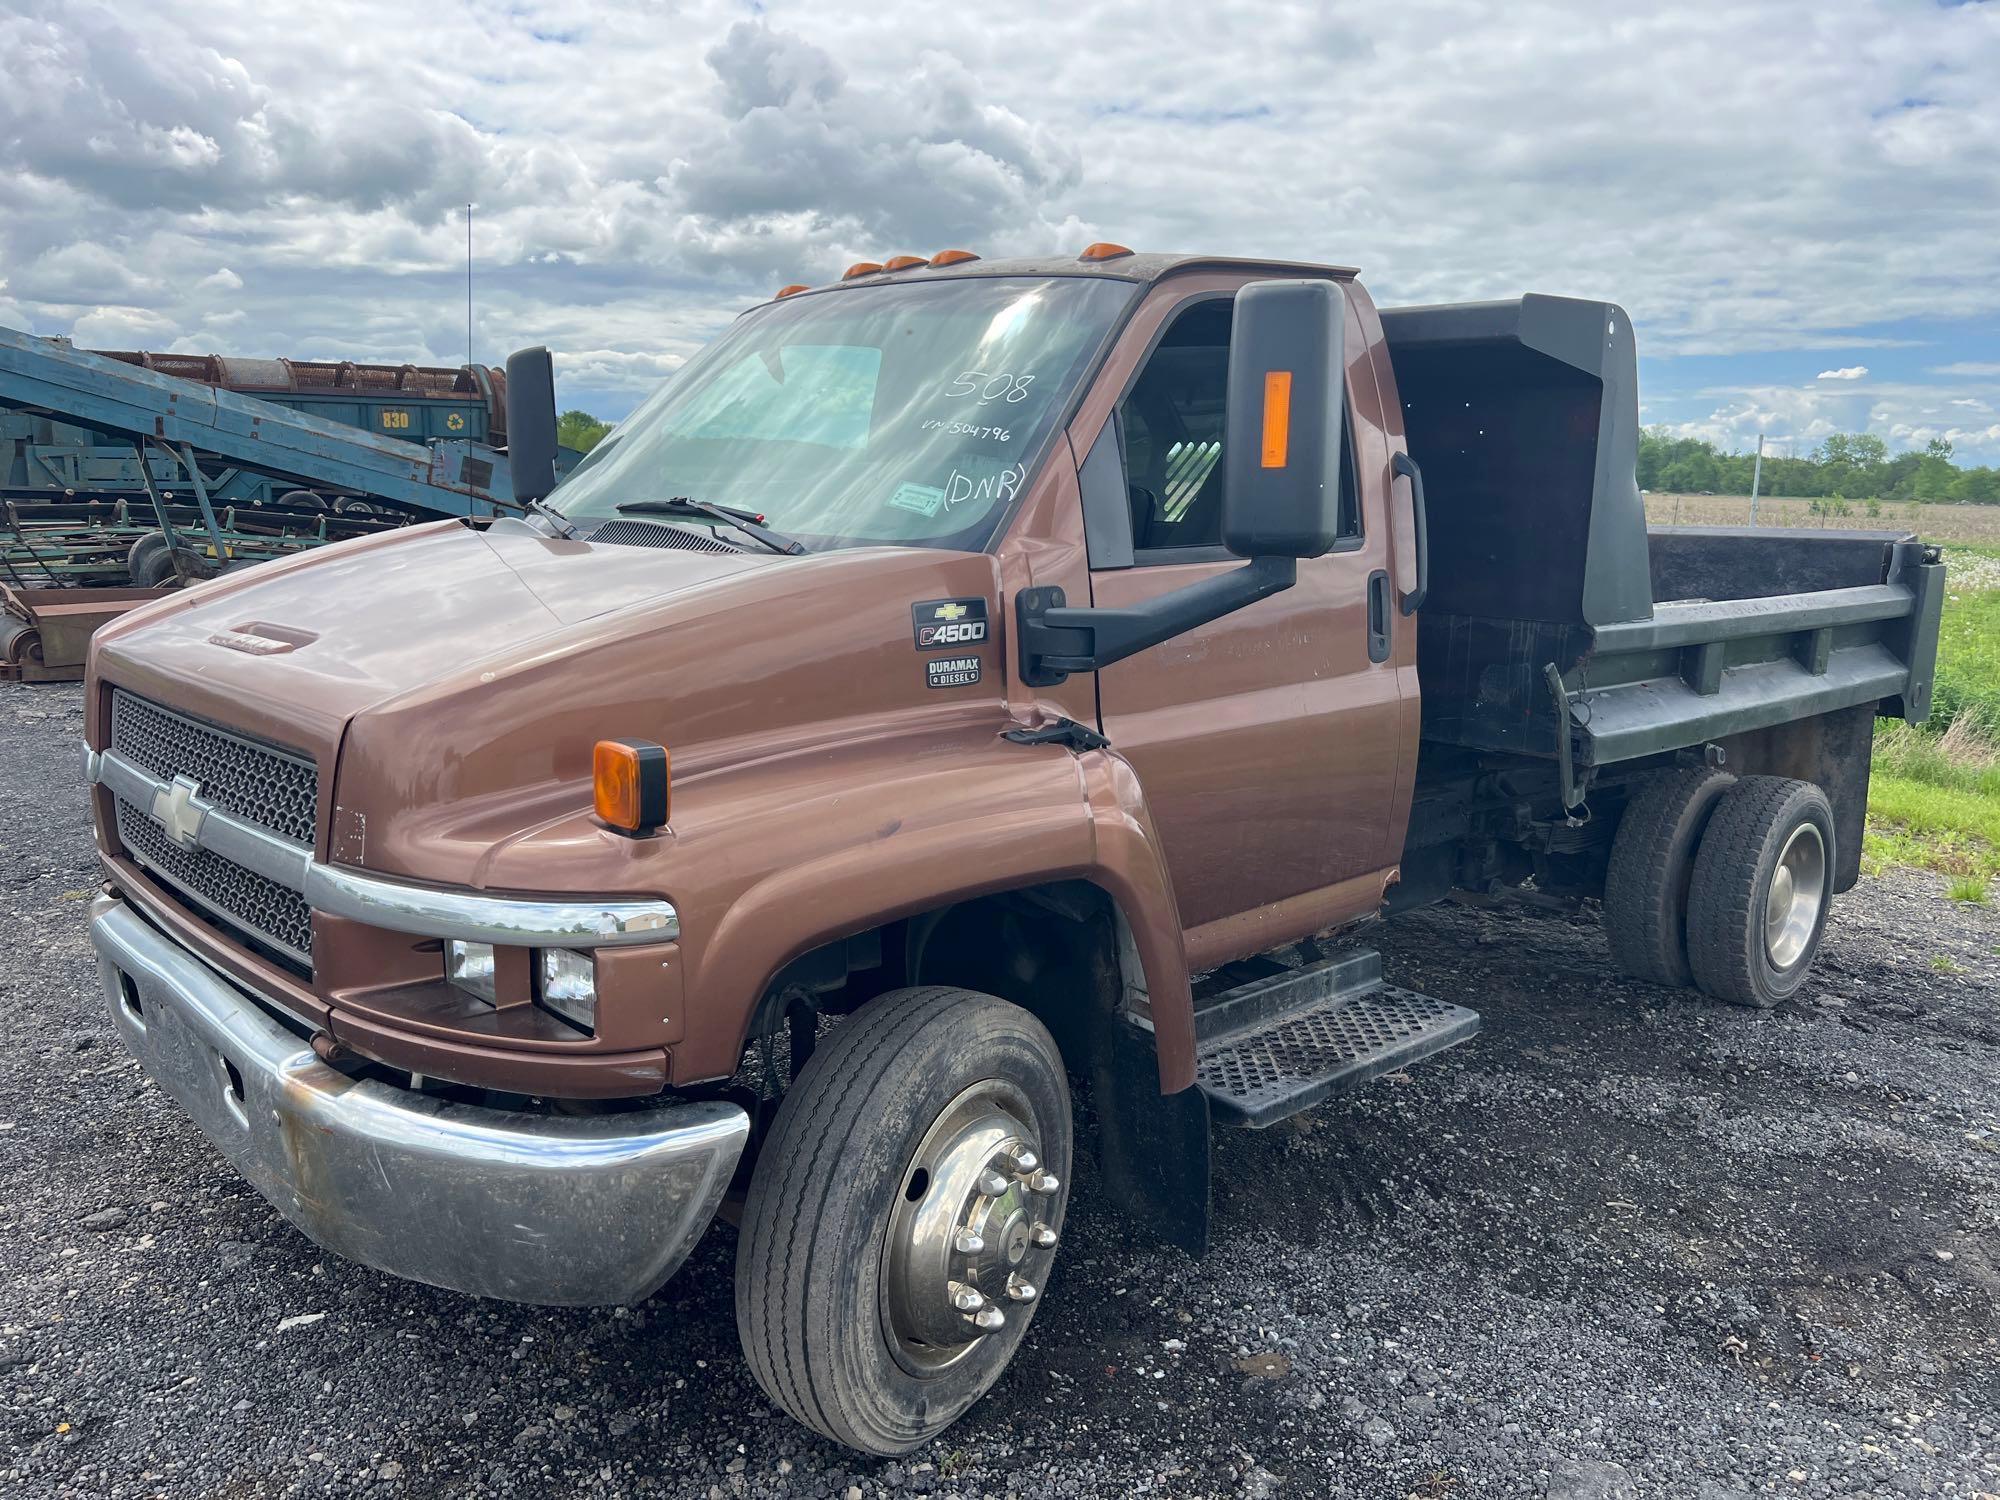 2005 CHEVY C4500 DUMP TRUCK VN:1GBE4C1245F504796 powered by Duramax diesel engine, equipped with